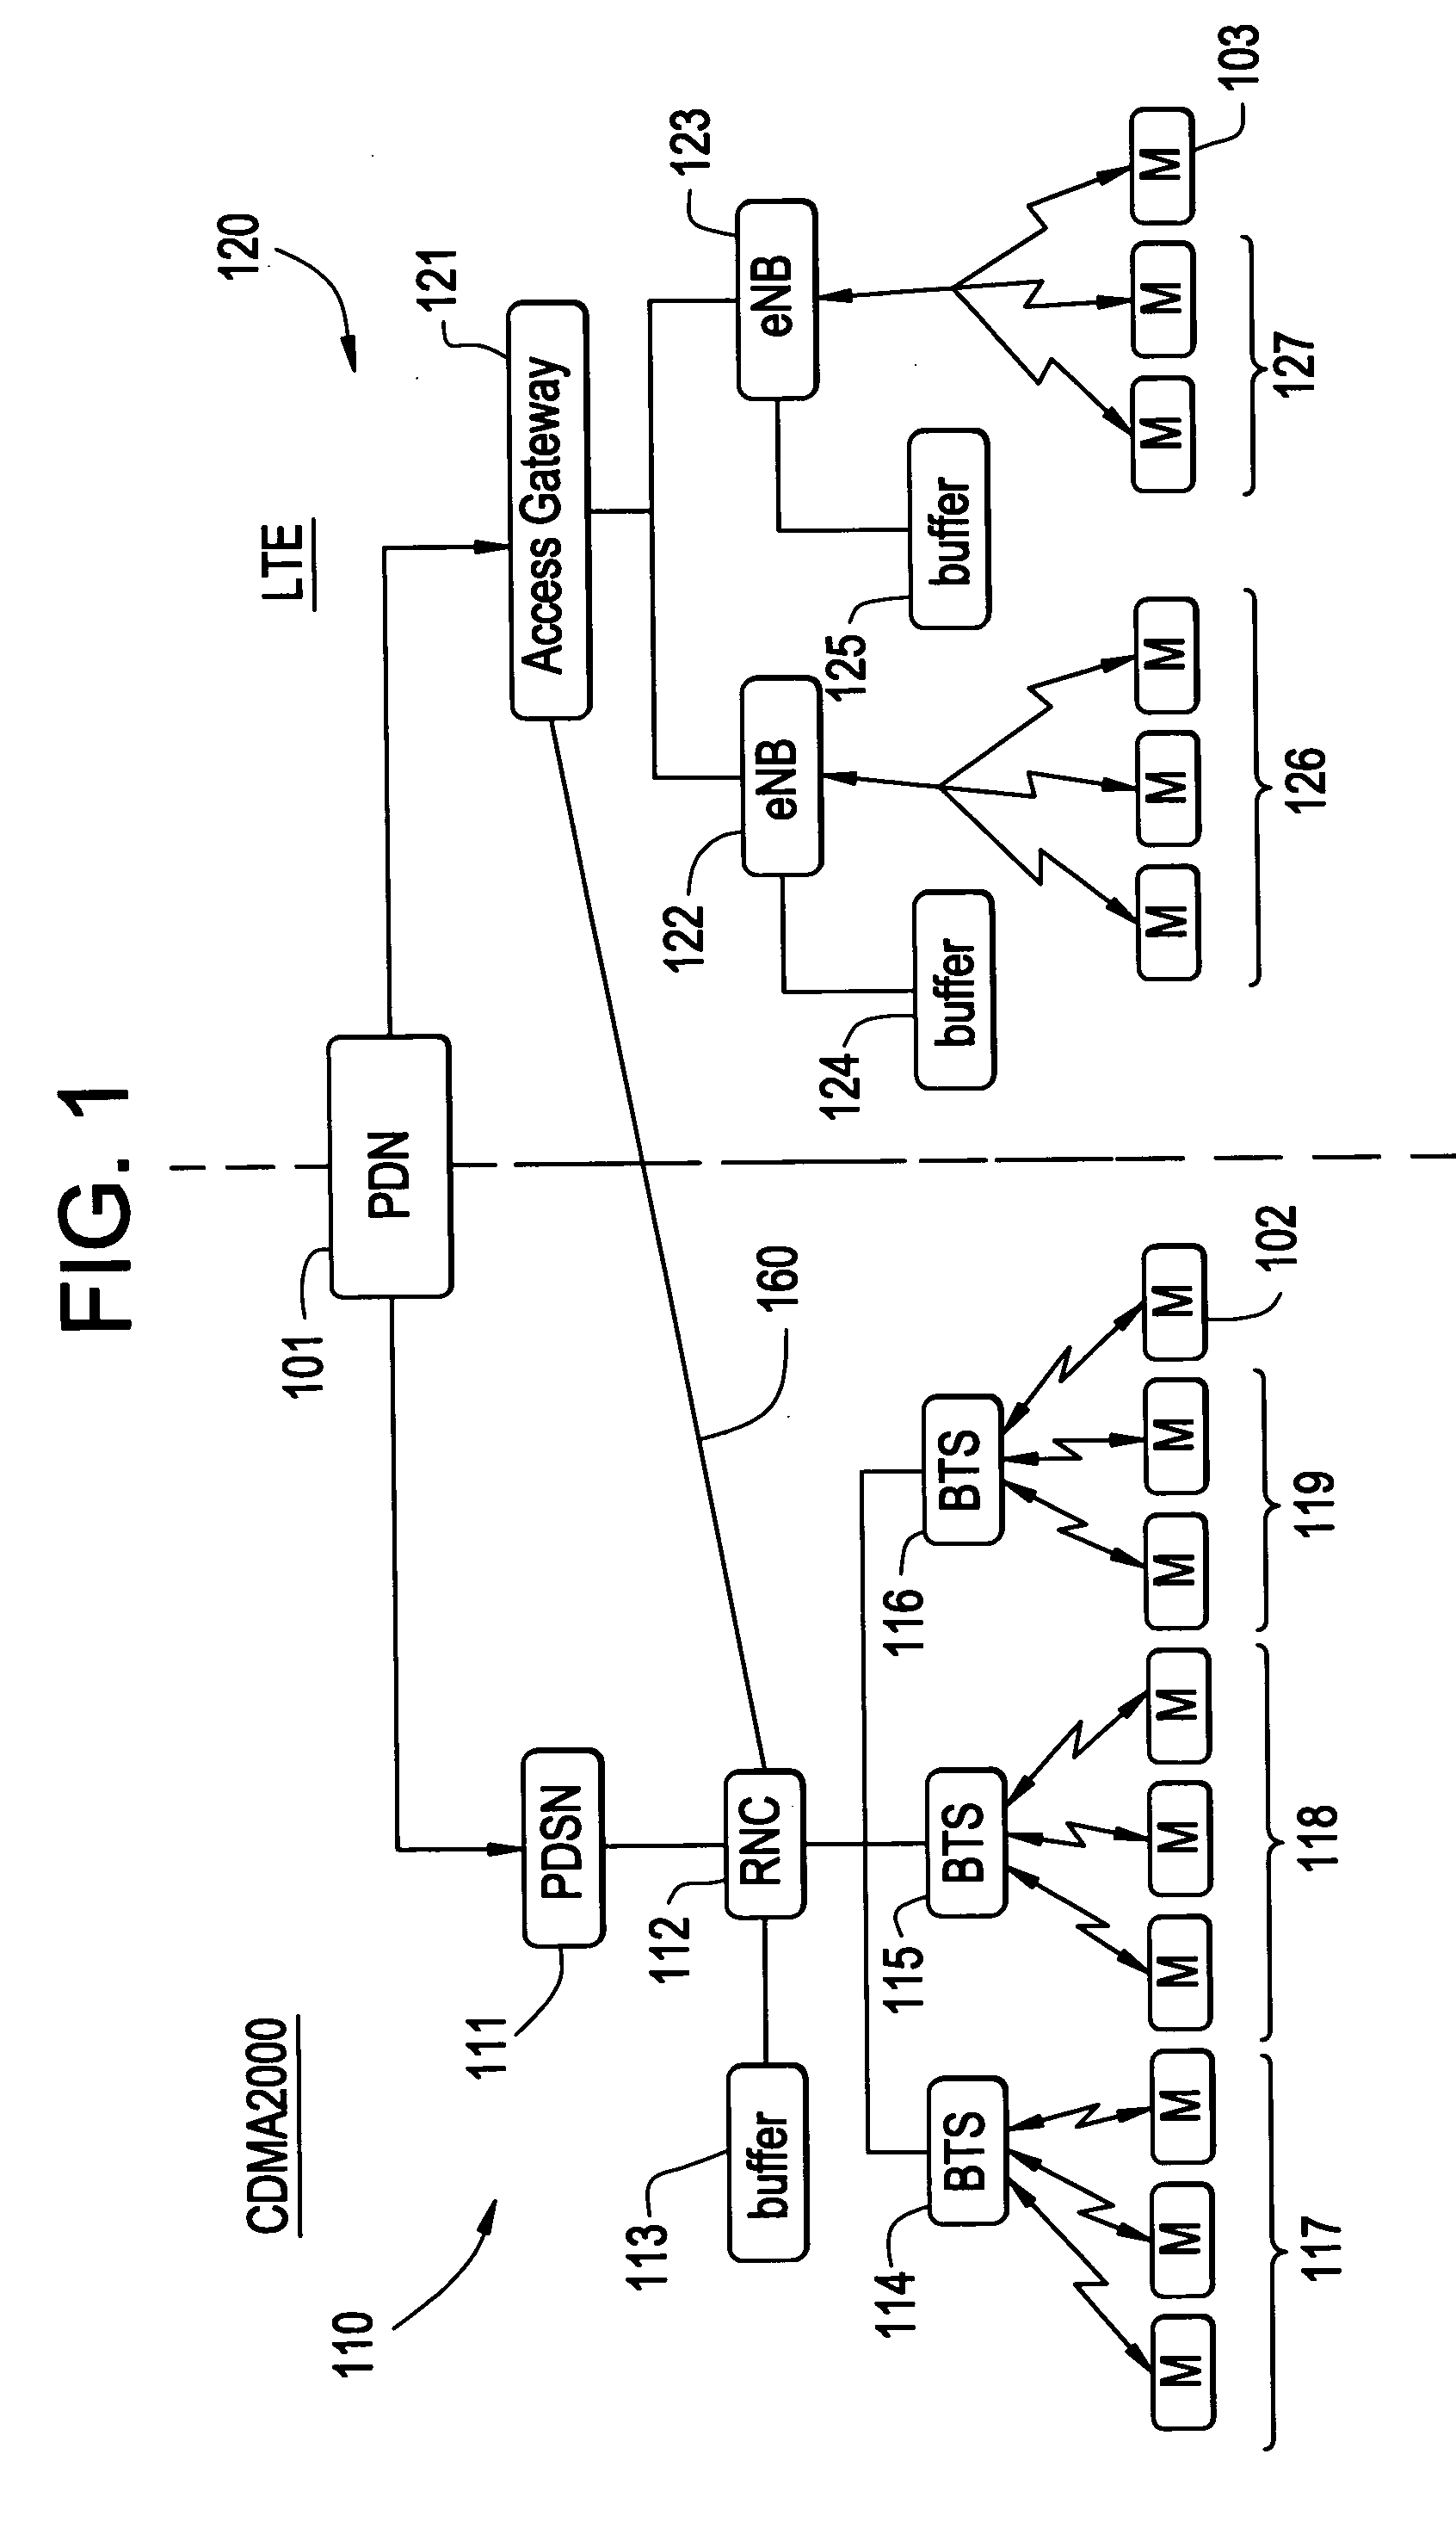 Method for providing seamless transition between networks following different protocols